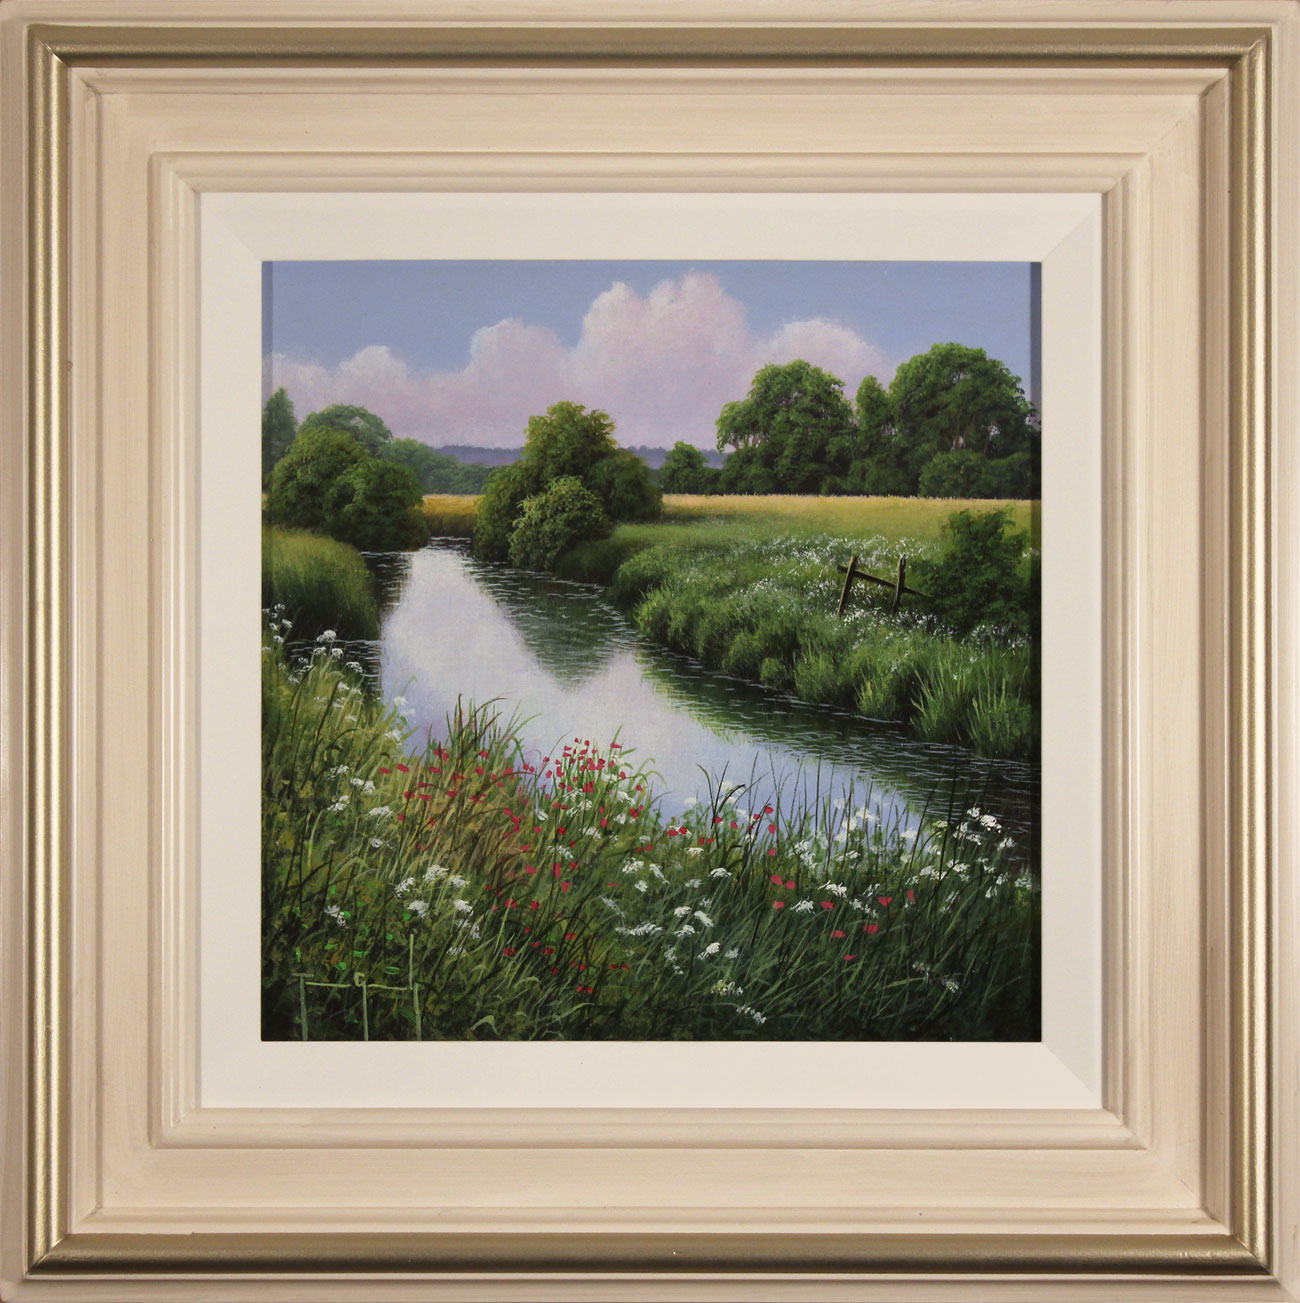 Terry Grundy, Original oil painting on panel, Days of Summer